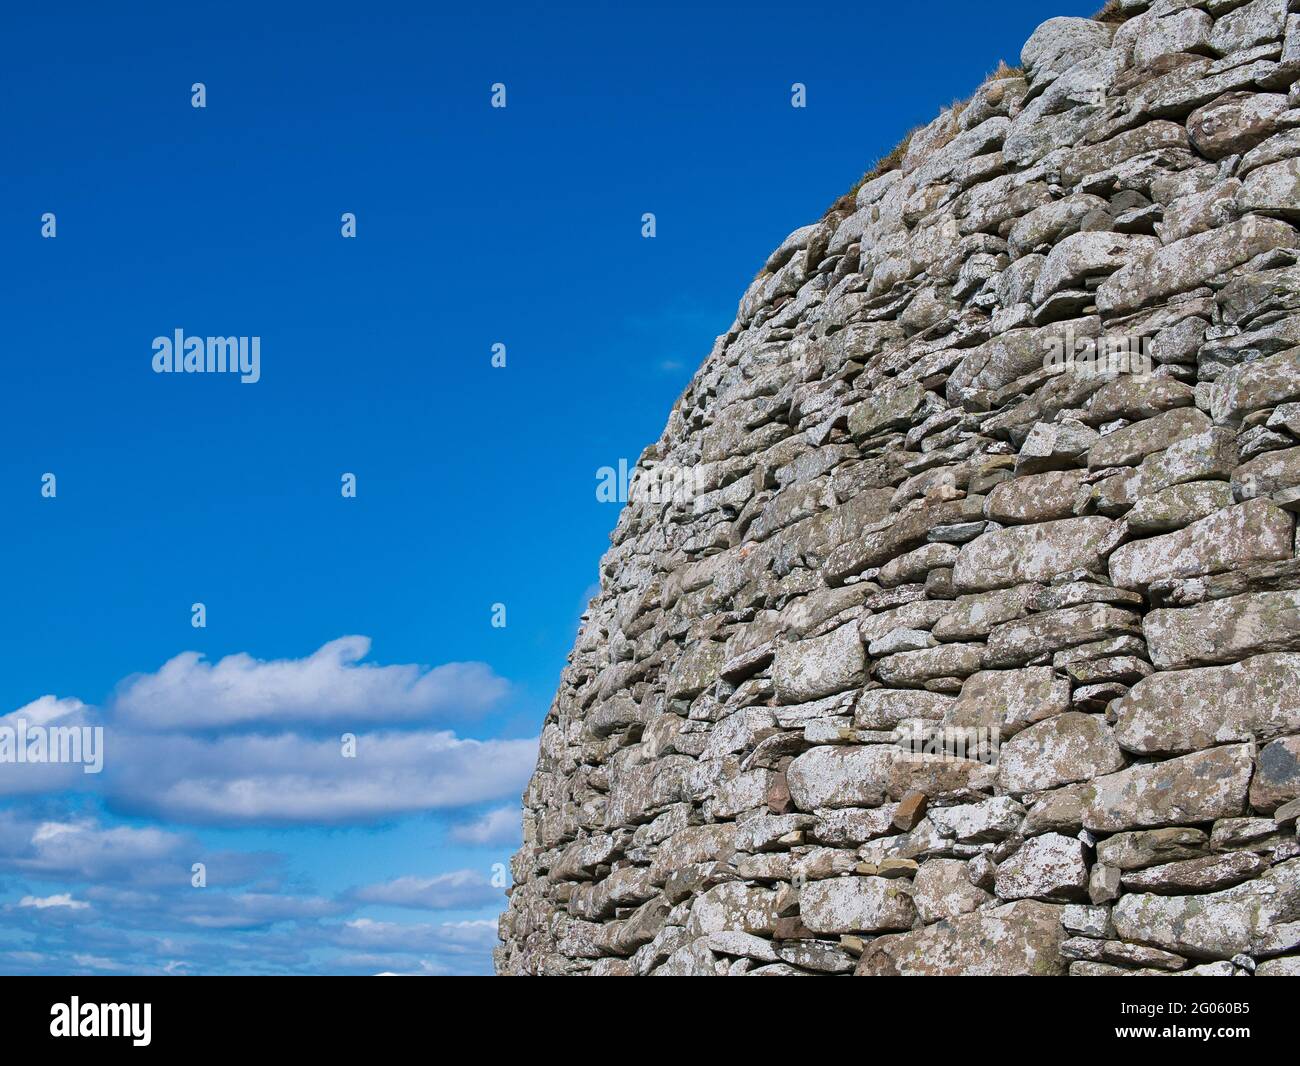 The dry stone wall structure of the Broch of Clickimin in Lerwick, Shetland, UK - taken on a sunny day with blue sky and white clouds Stock Photo